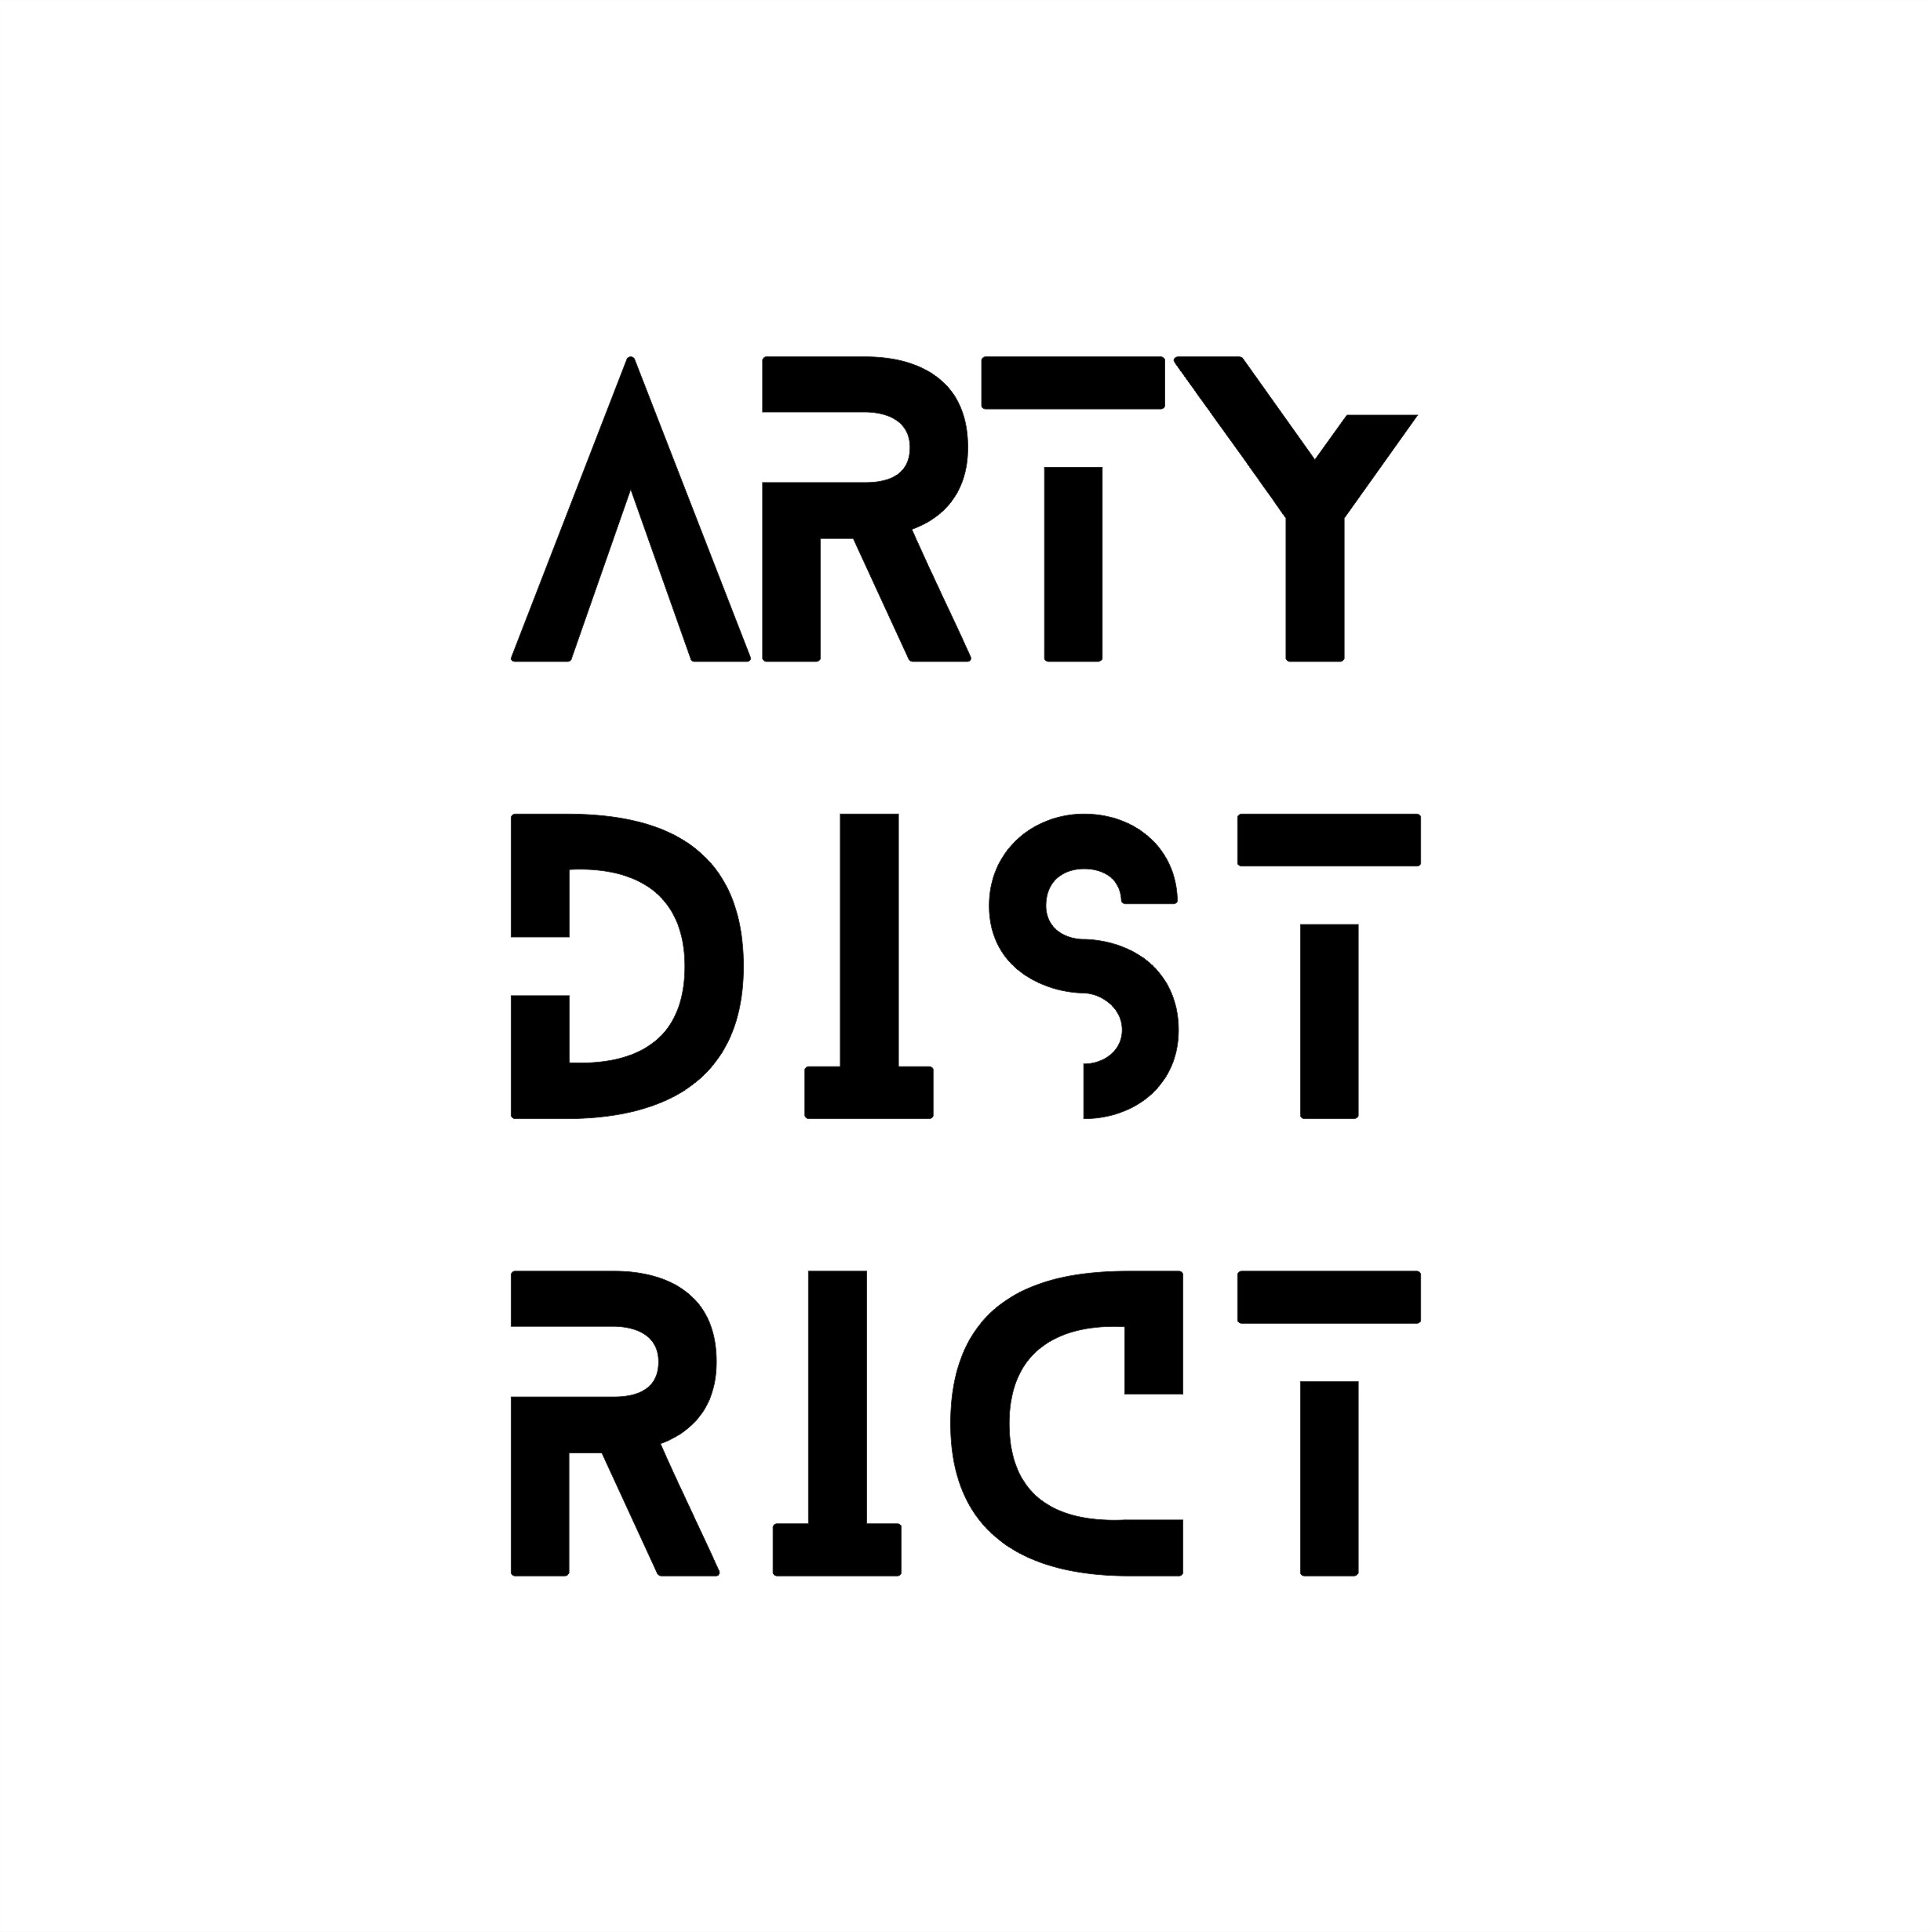 Arty District